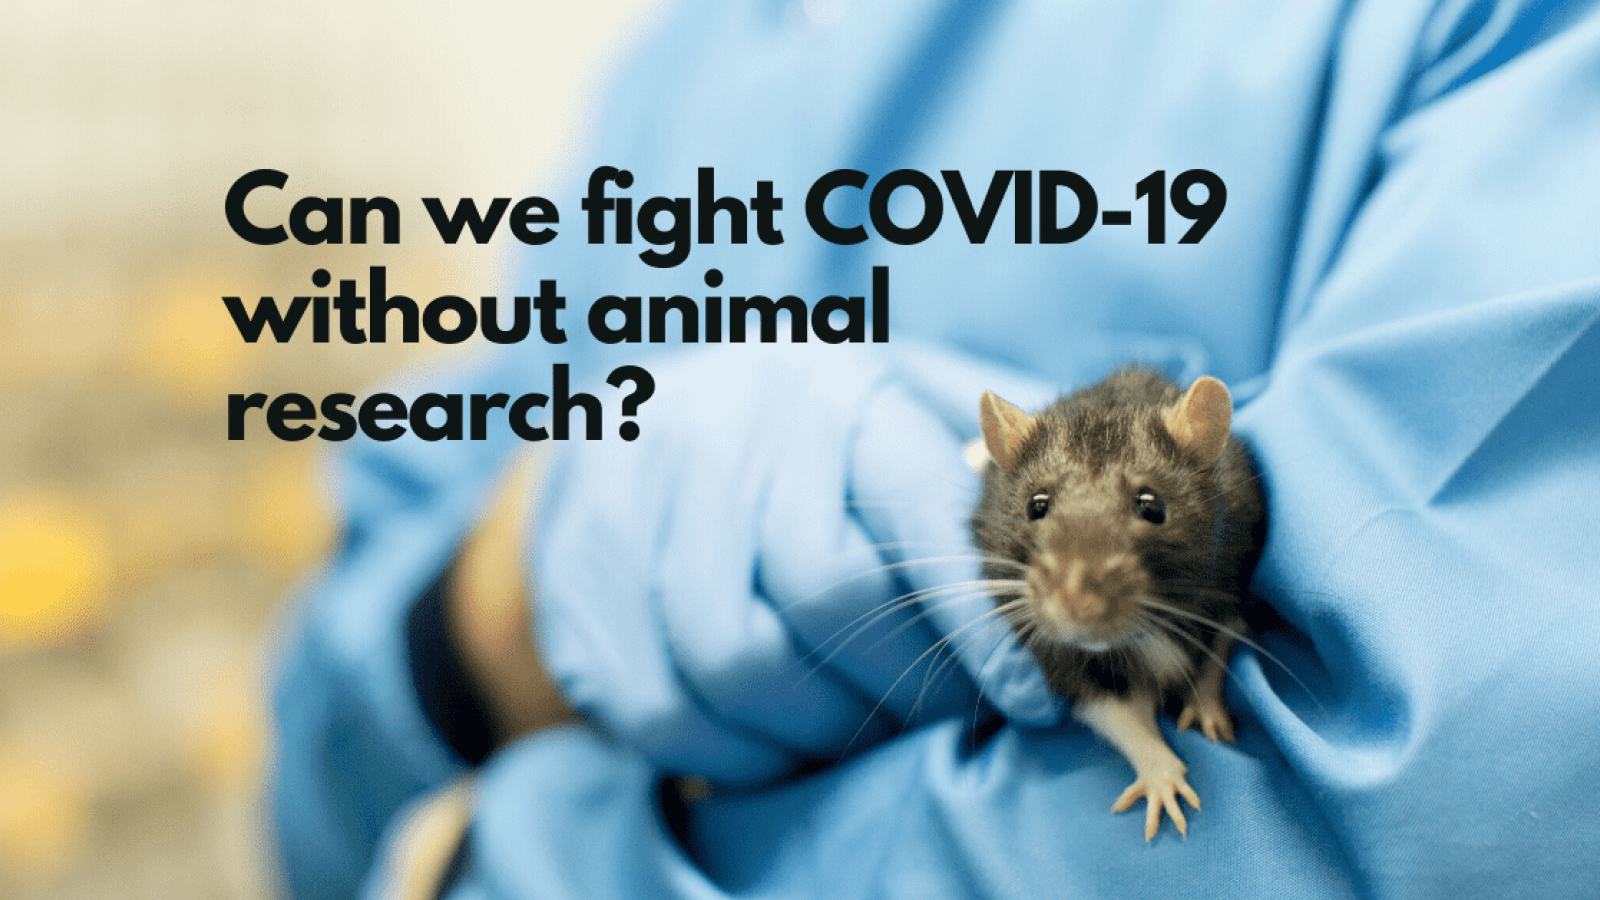 Can we fight COVID-19 without animal testing?